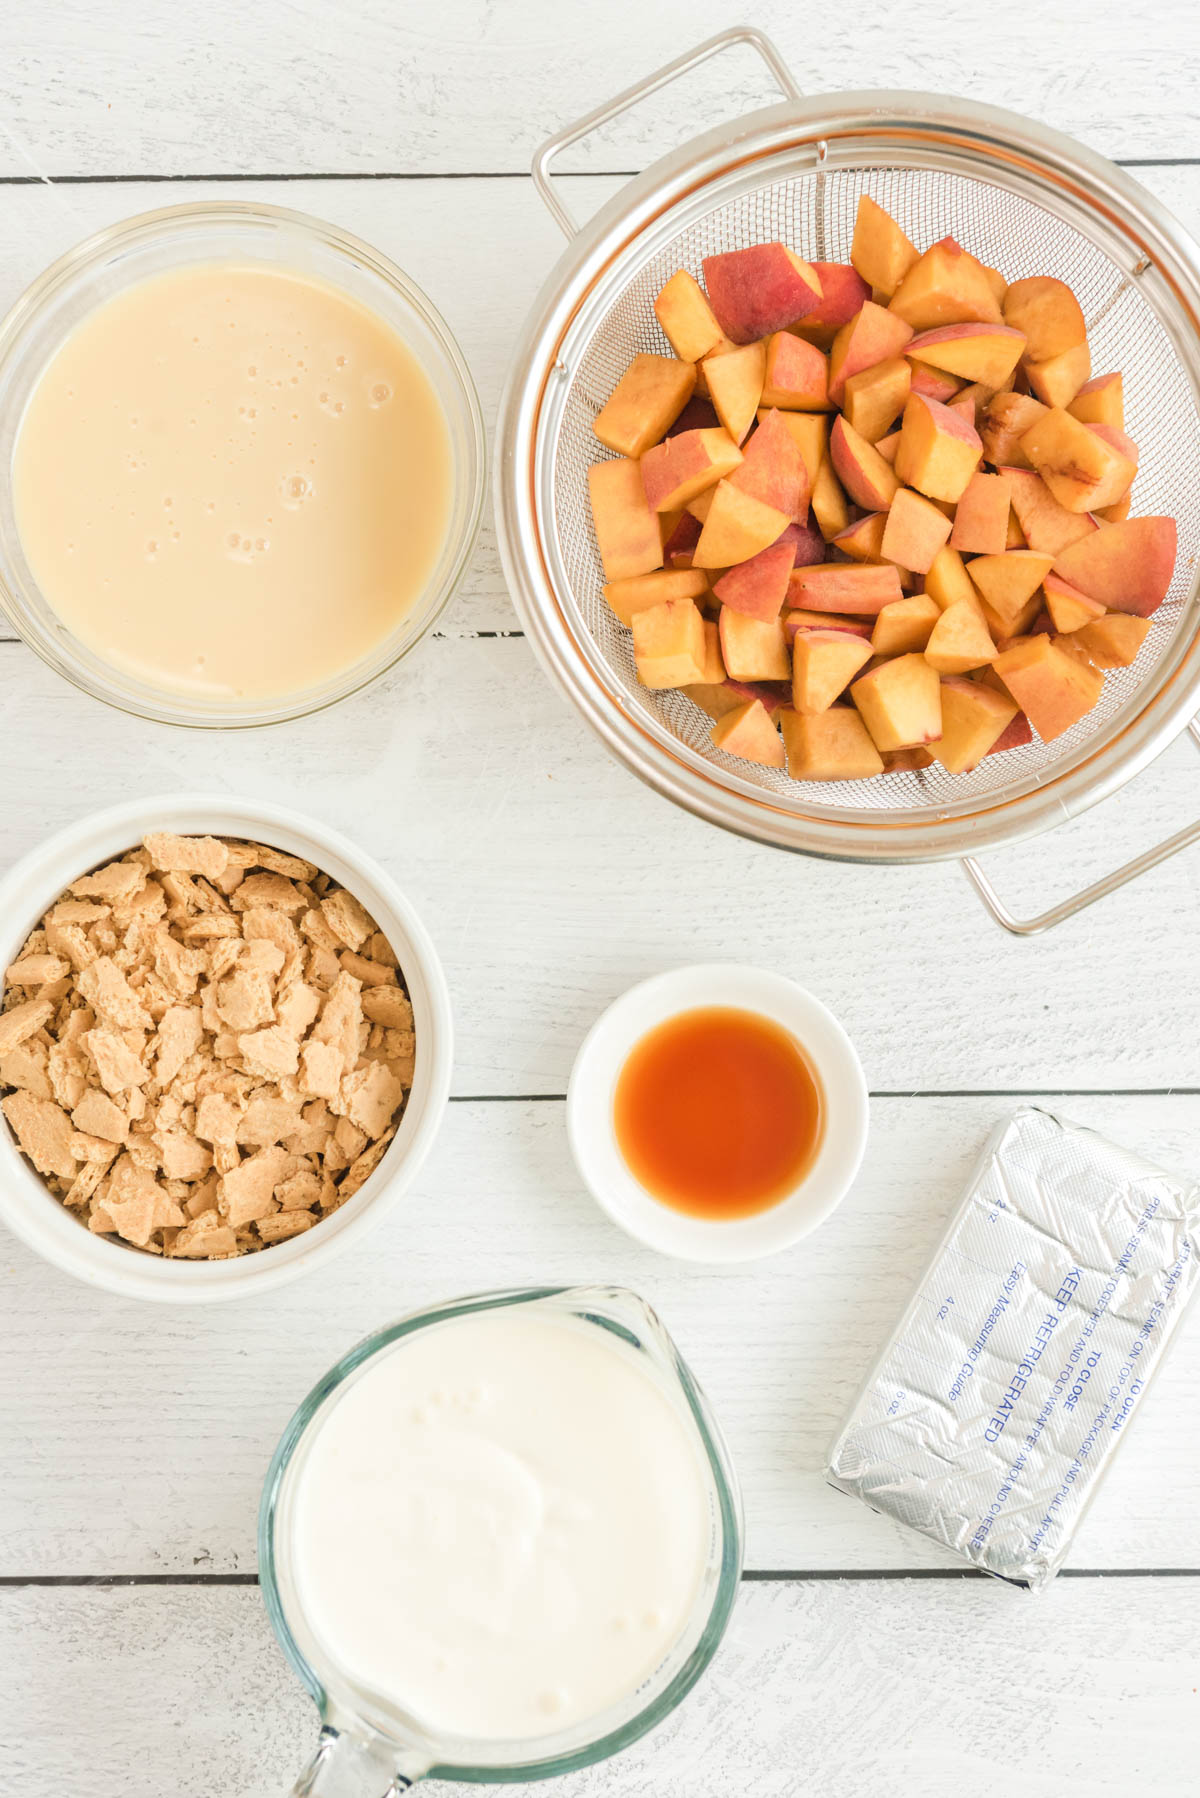 Ingredients for Peach Ice Cream. 